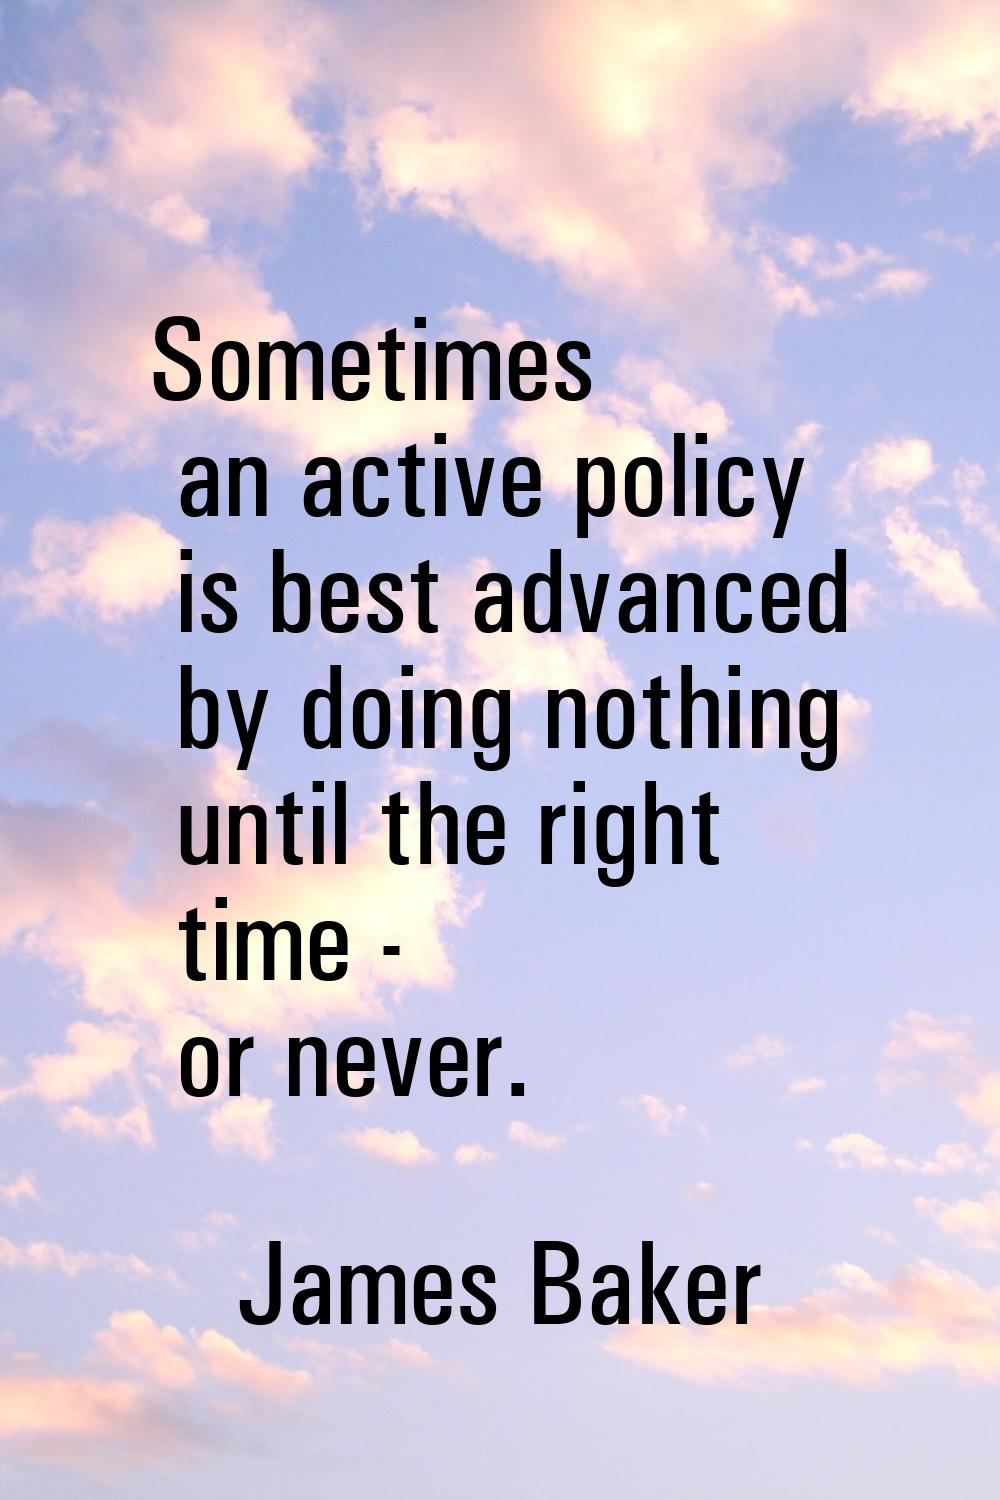 Sometimes an active policy is best advanced by doing nothing until the right time - or never.